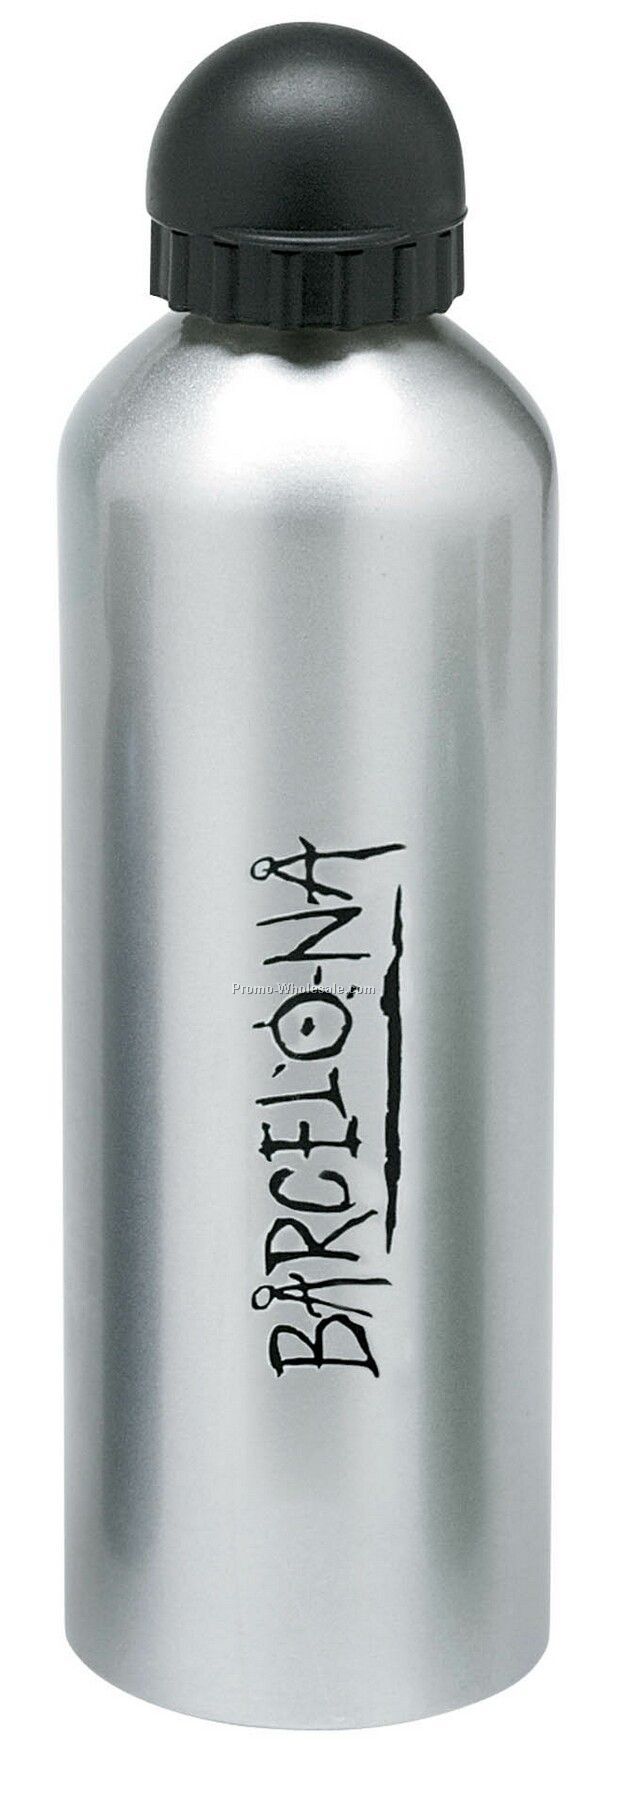 Giftcor 1 Liter Green Aluminum Sport Flask II W/ Dome Sports Top